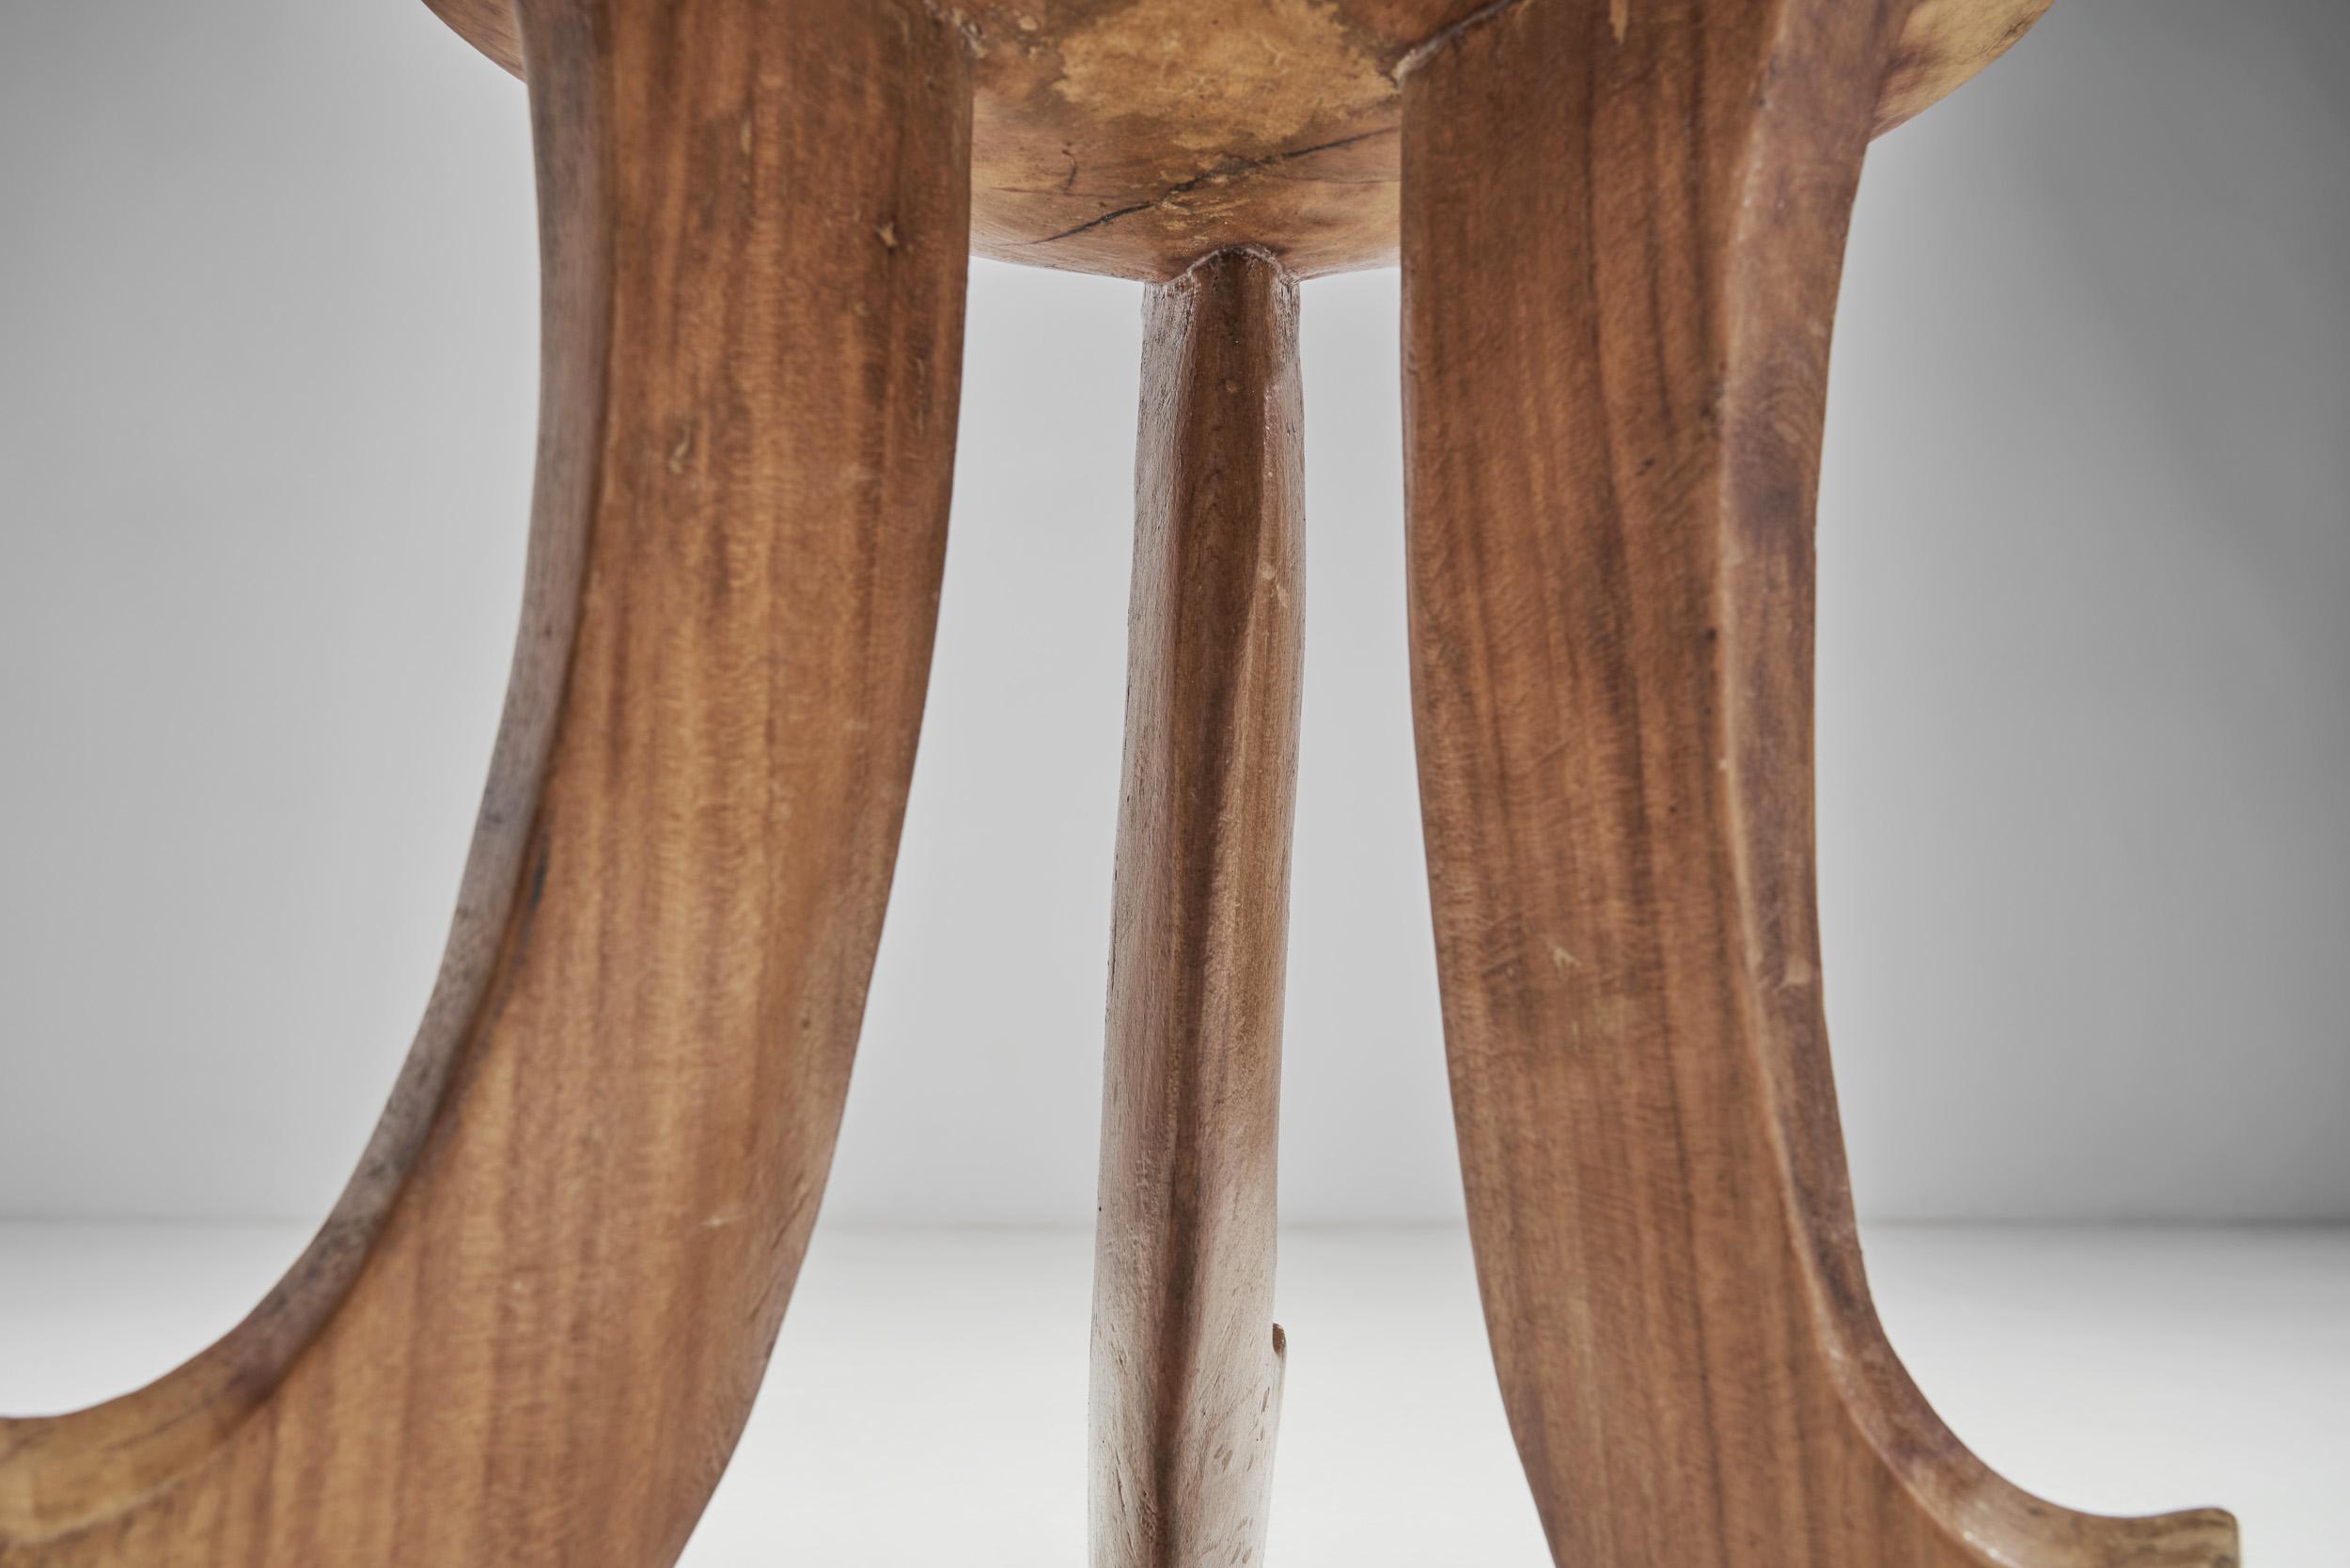 Ethiopian-Style Stool with Scrolled Legs, Norway, First Half of the 20th Century For Sale 6